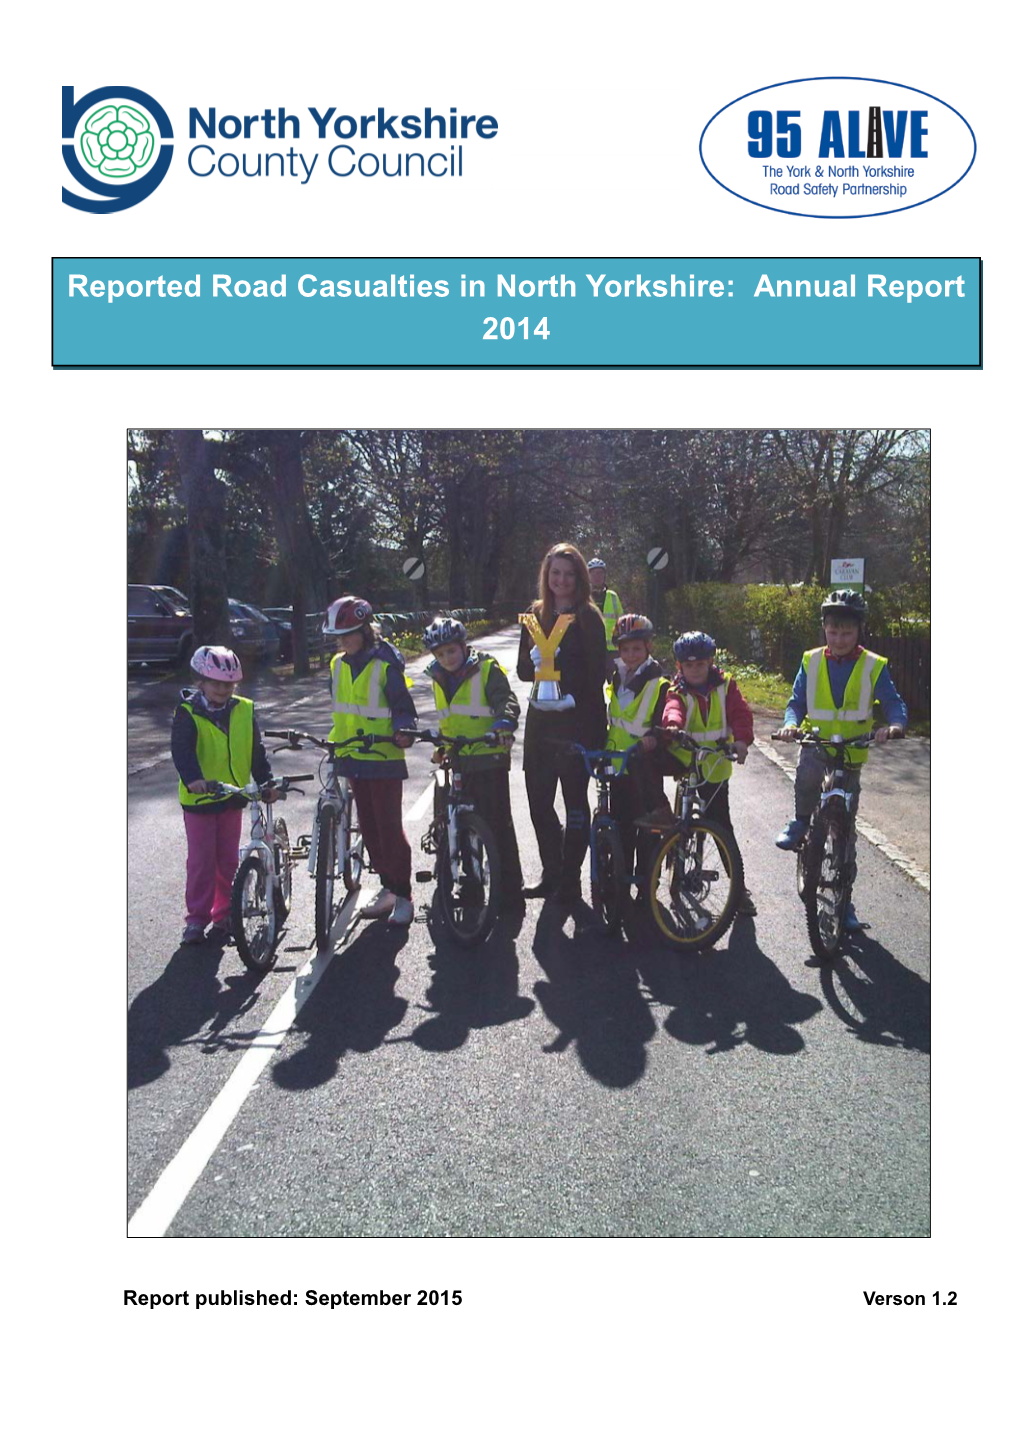 Road Casualties – North Yorkshire 2014 Annual Report